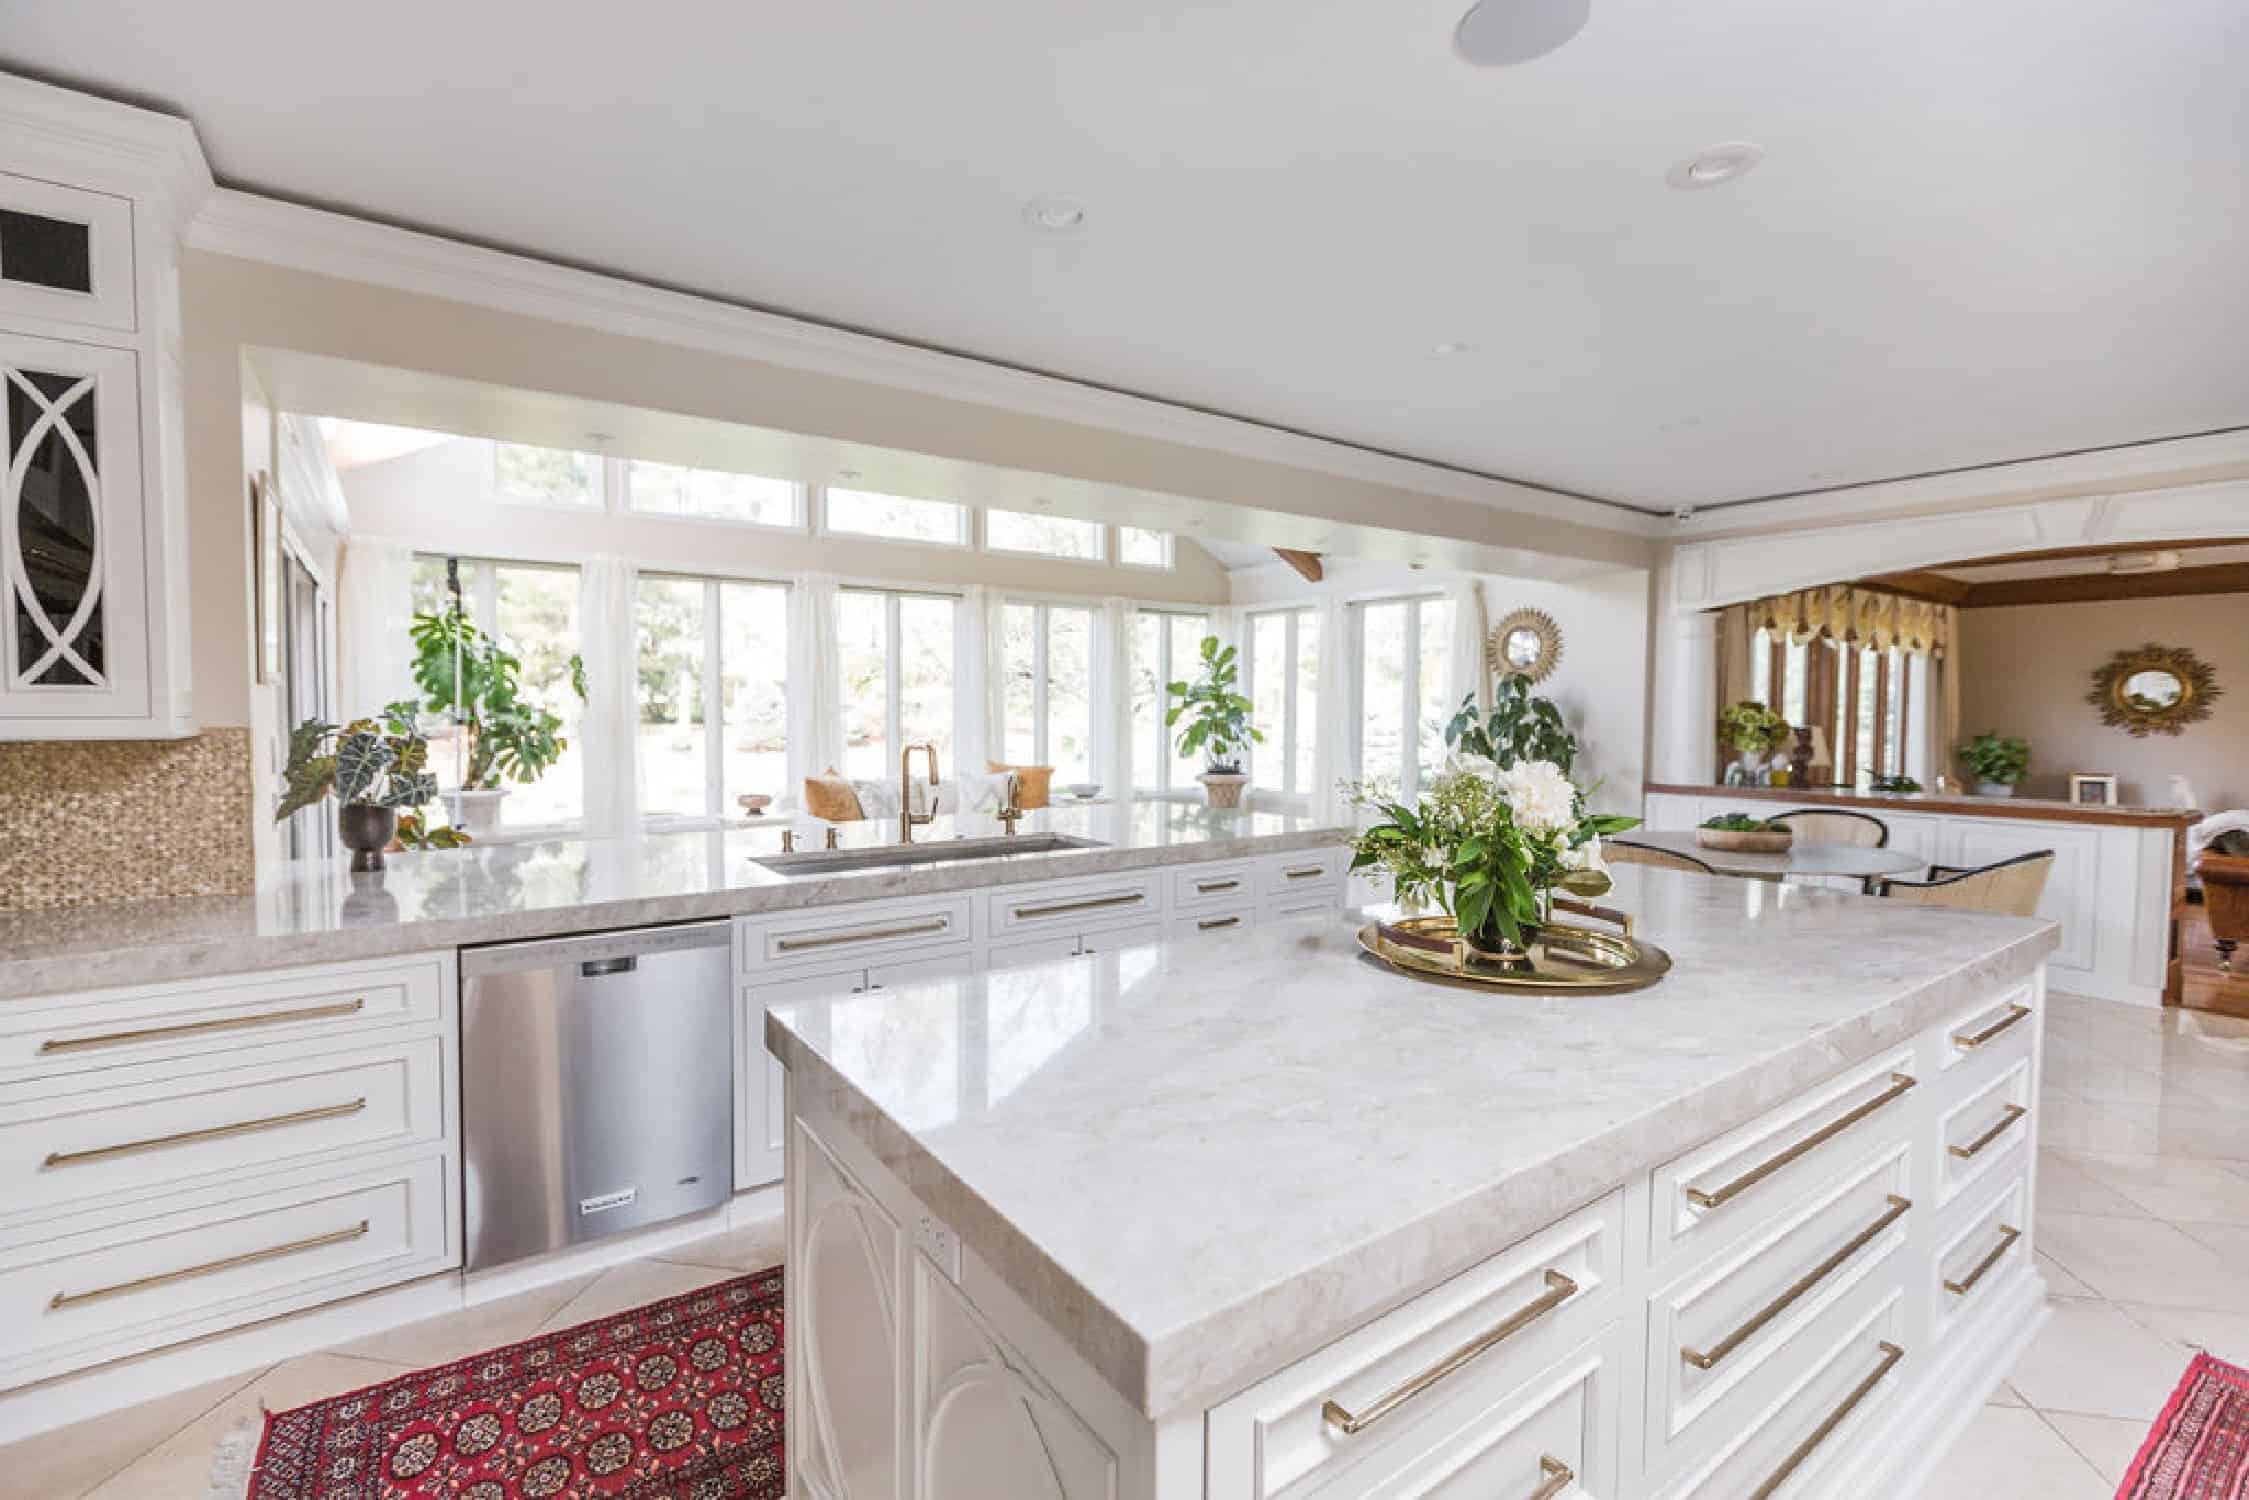 Nicholas Design Build | A large kitchen with white cabinets and a marble counter top, perfect for a remodel.